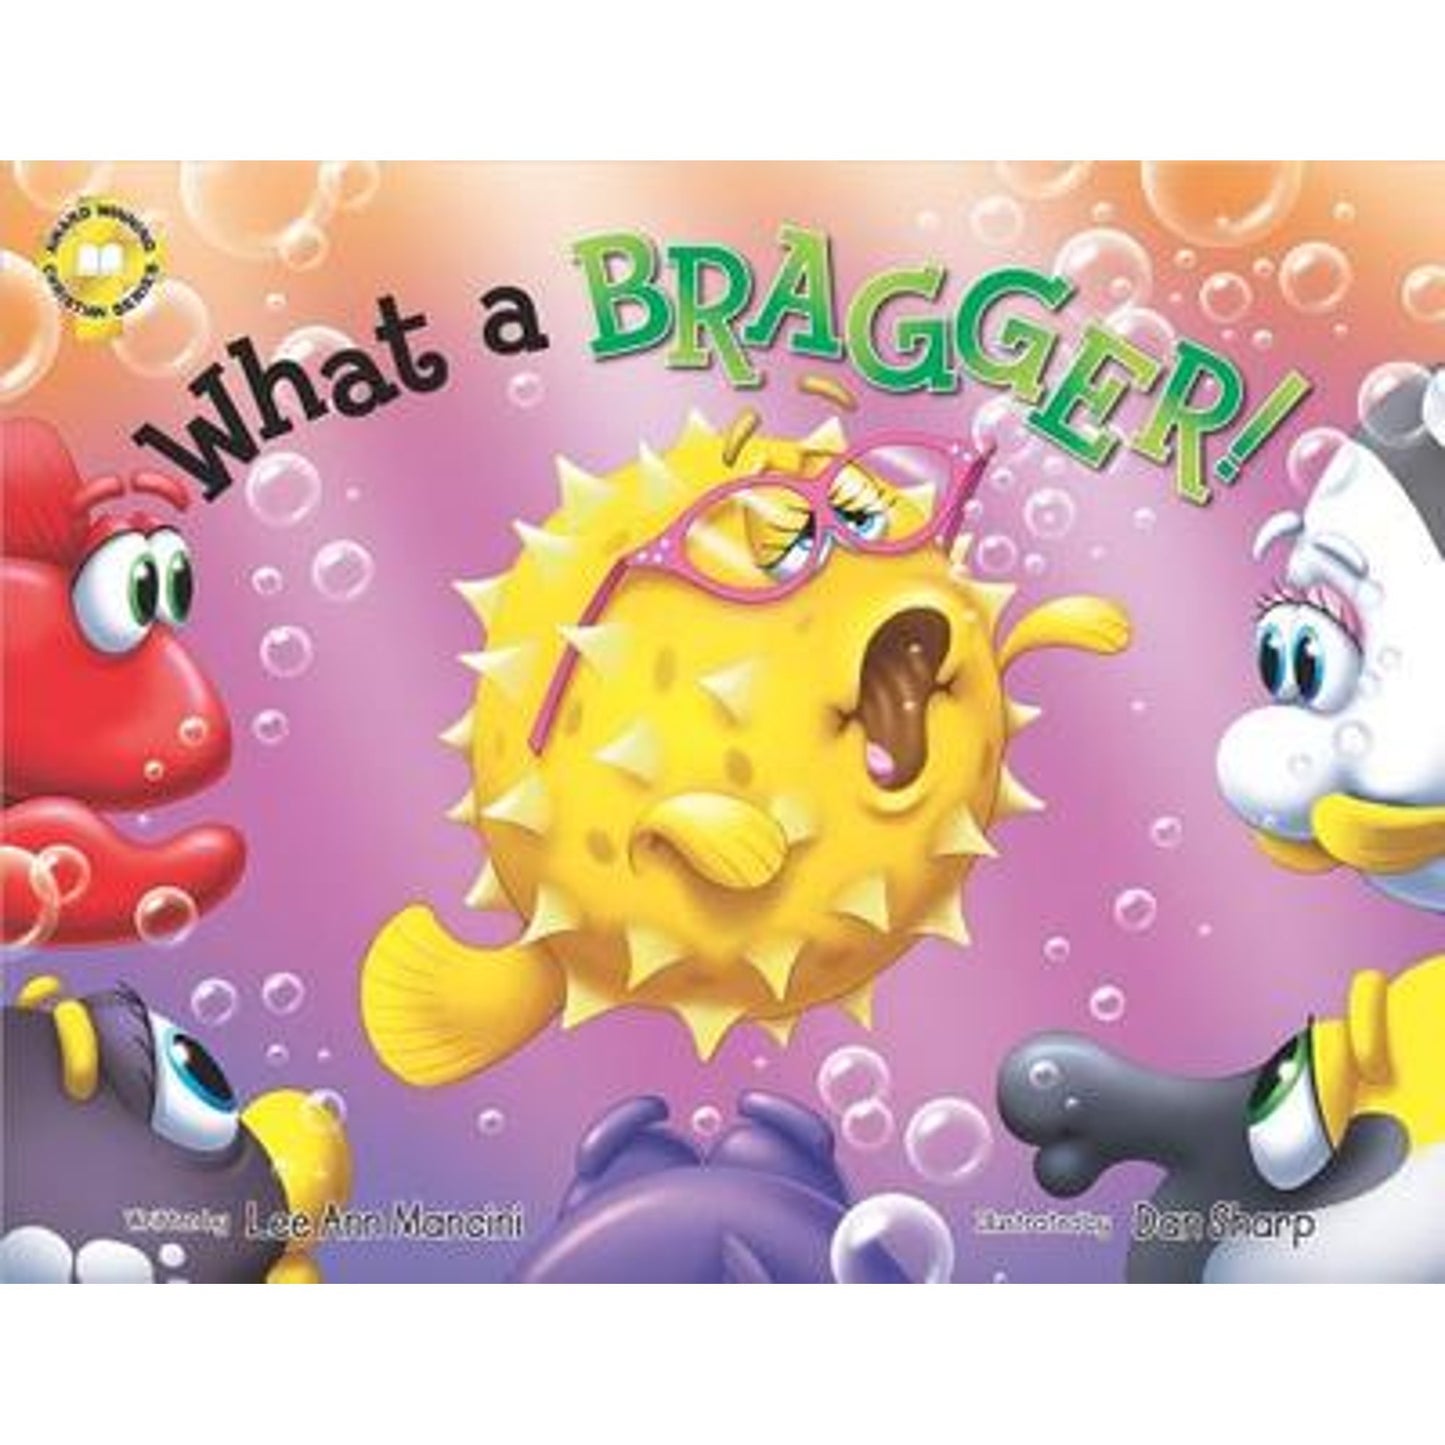 What a Bragger!: Adventures of the Sea Kids